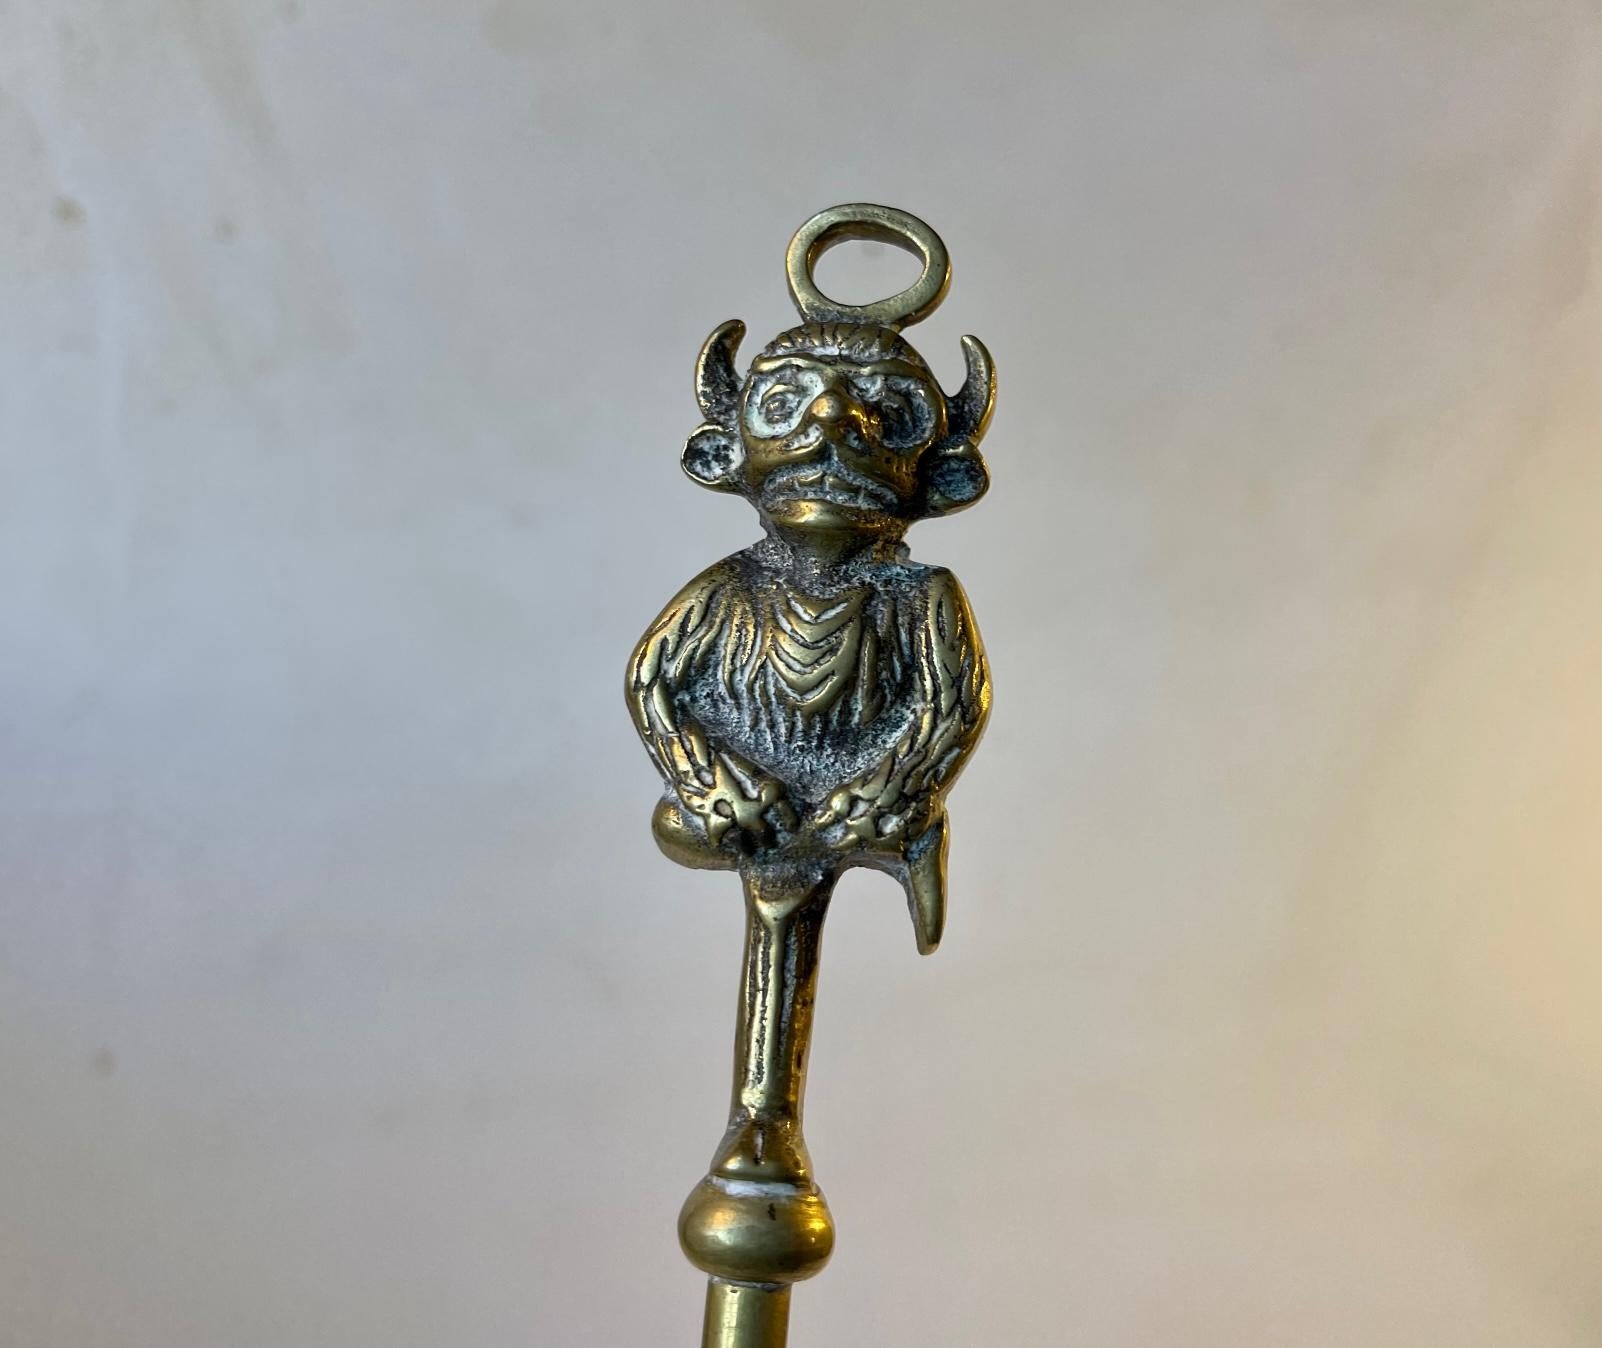 Vintage possibly antique converted toasting fork in solid brass. It has a twisted stem and is set with the Imp of Lincoln Cathedral in England. Hidden in the upper reaches of Lincoln Cathedral you'll find the Lincoln Imp. Legend has it that one day